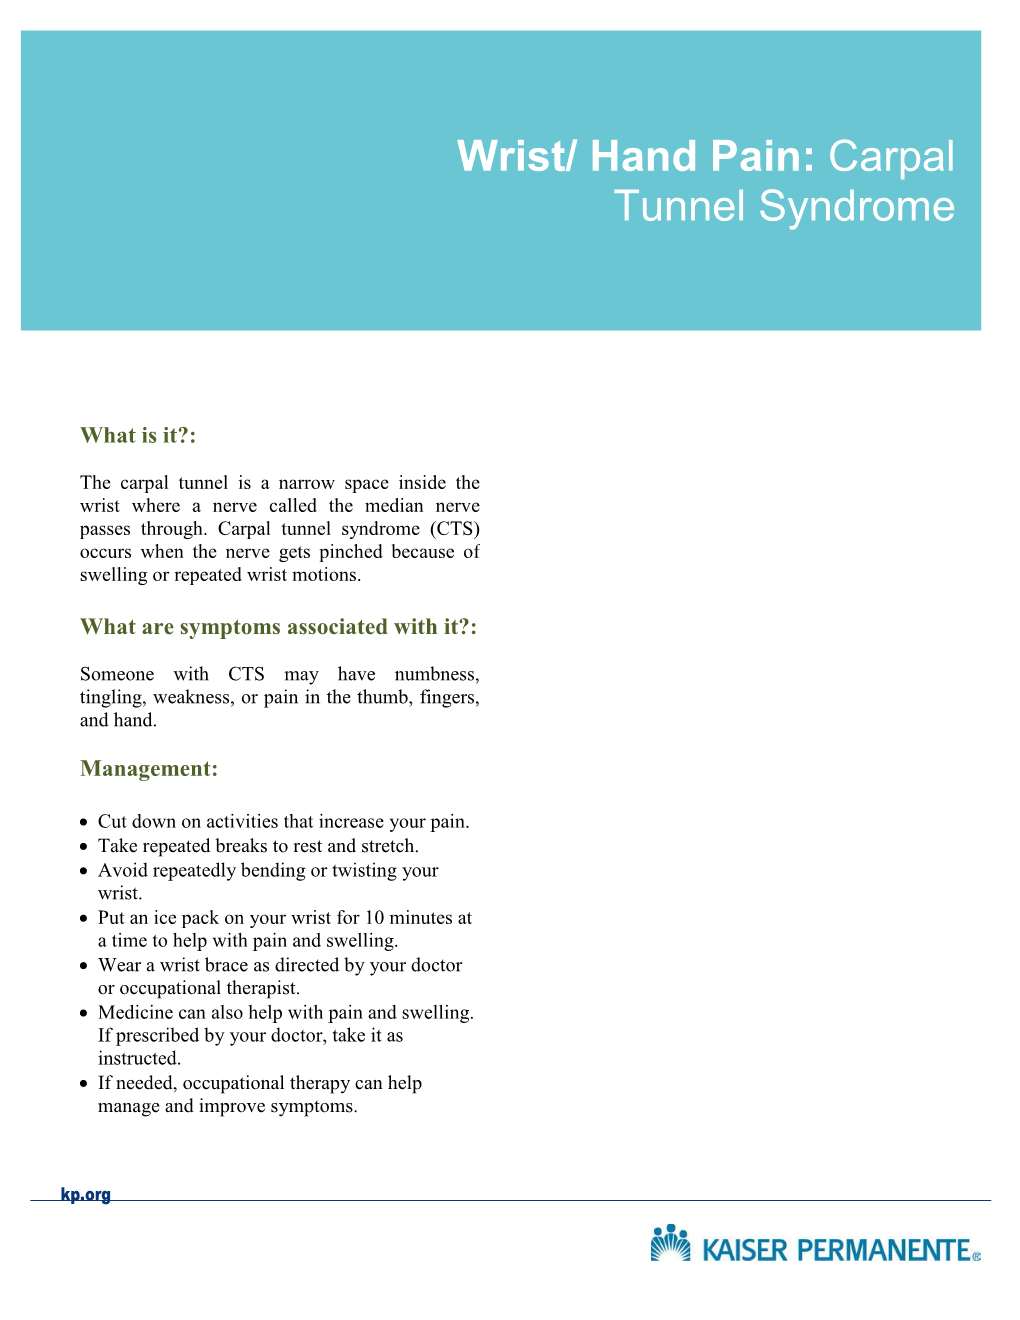 Wrist/Hand Pain: Carpal Tunnel Syndrome